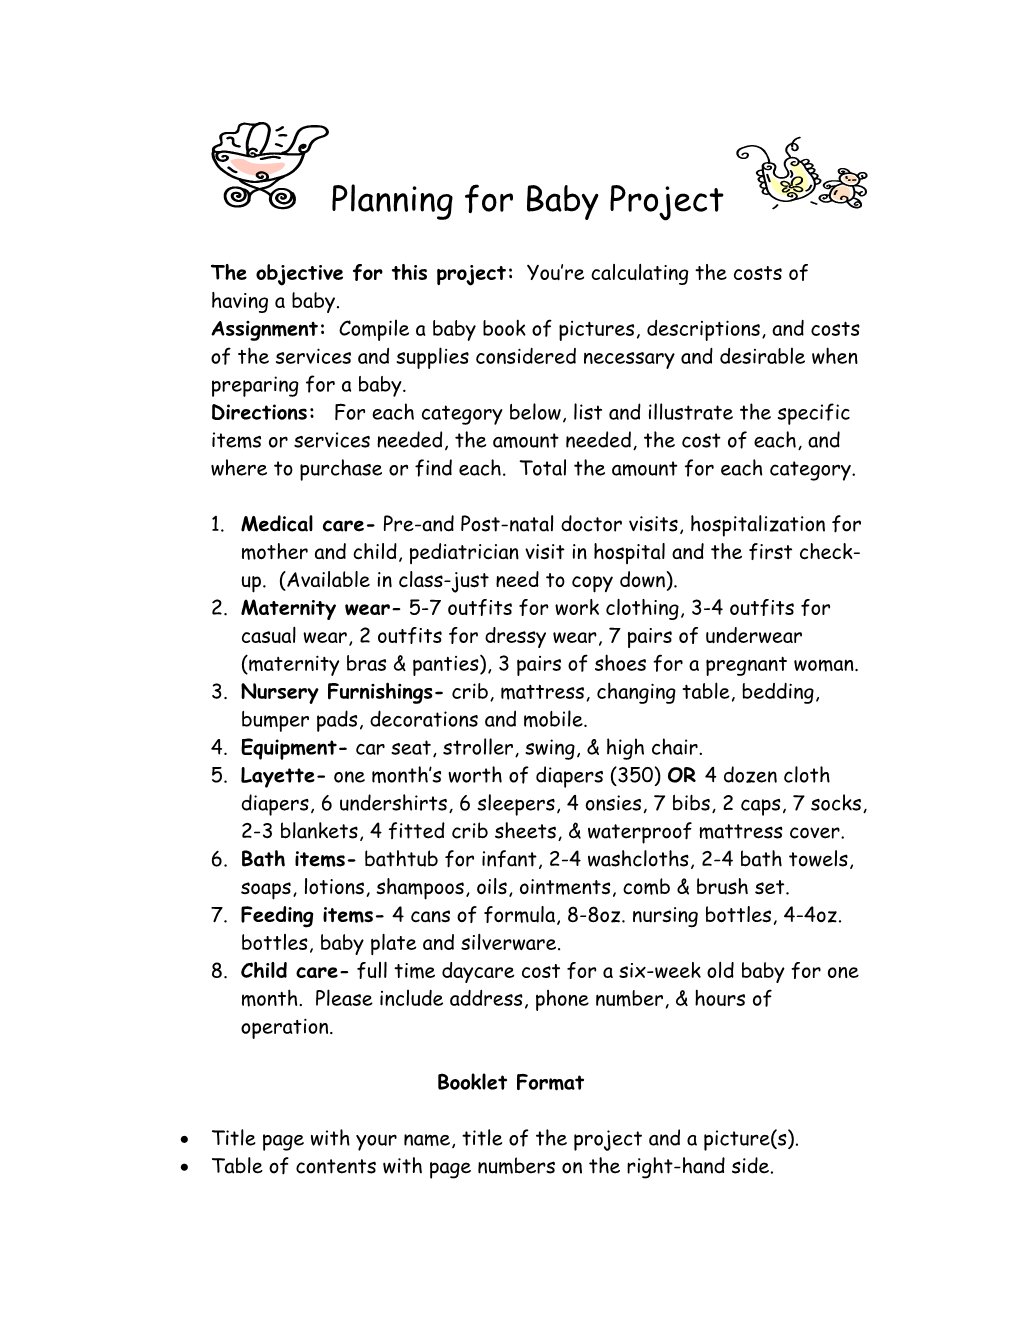 Planning for Baby Project